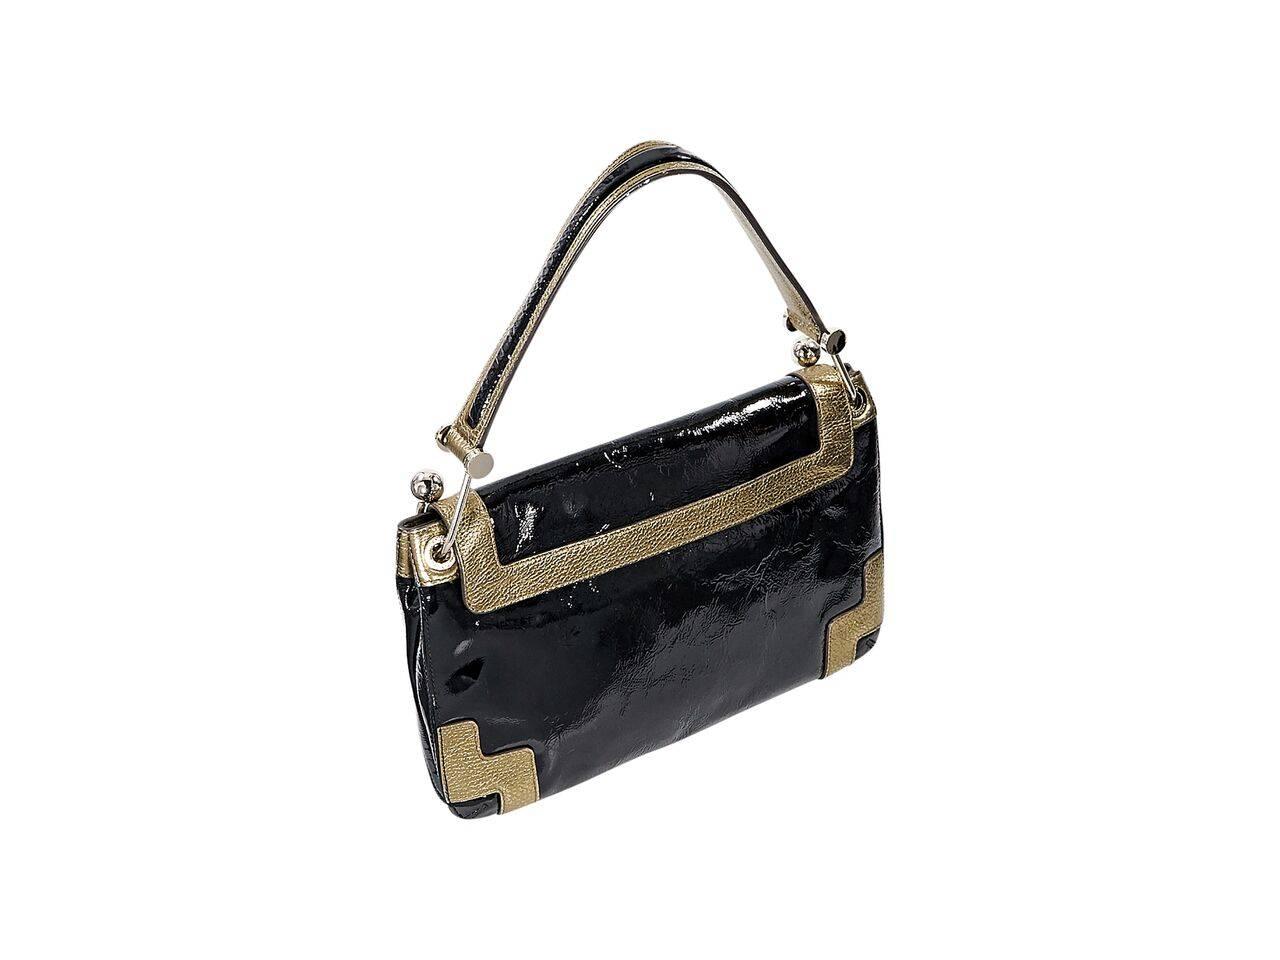 Product details:  Black patent leather Lautner shoulder bag by Anya Hindmarch.  Trimmed with gold leather.  Single shoulder strap.  Front flap.  Lined interior with inner zip and slide pockets plus a pen slot.  Goldtone hardware.  14"L x